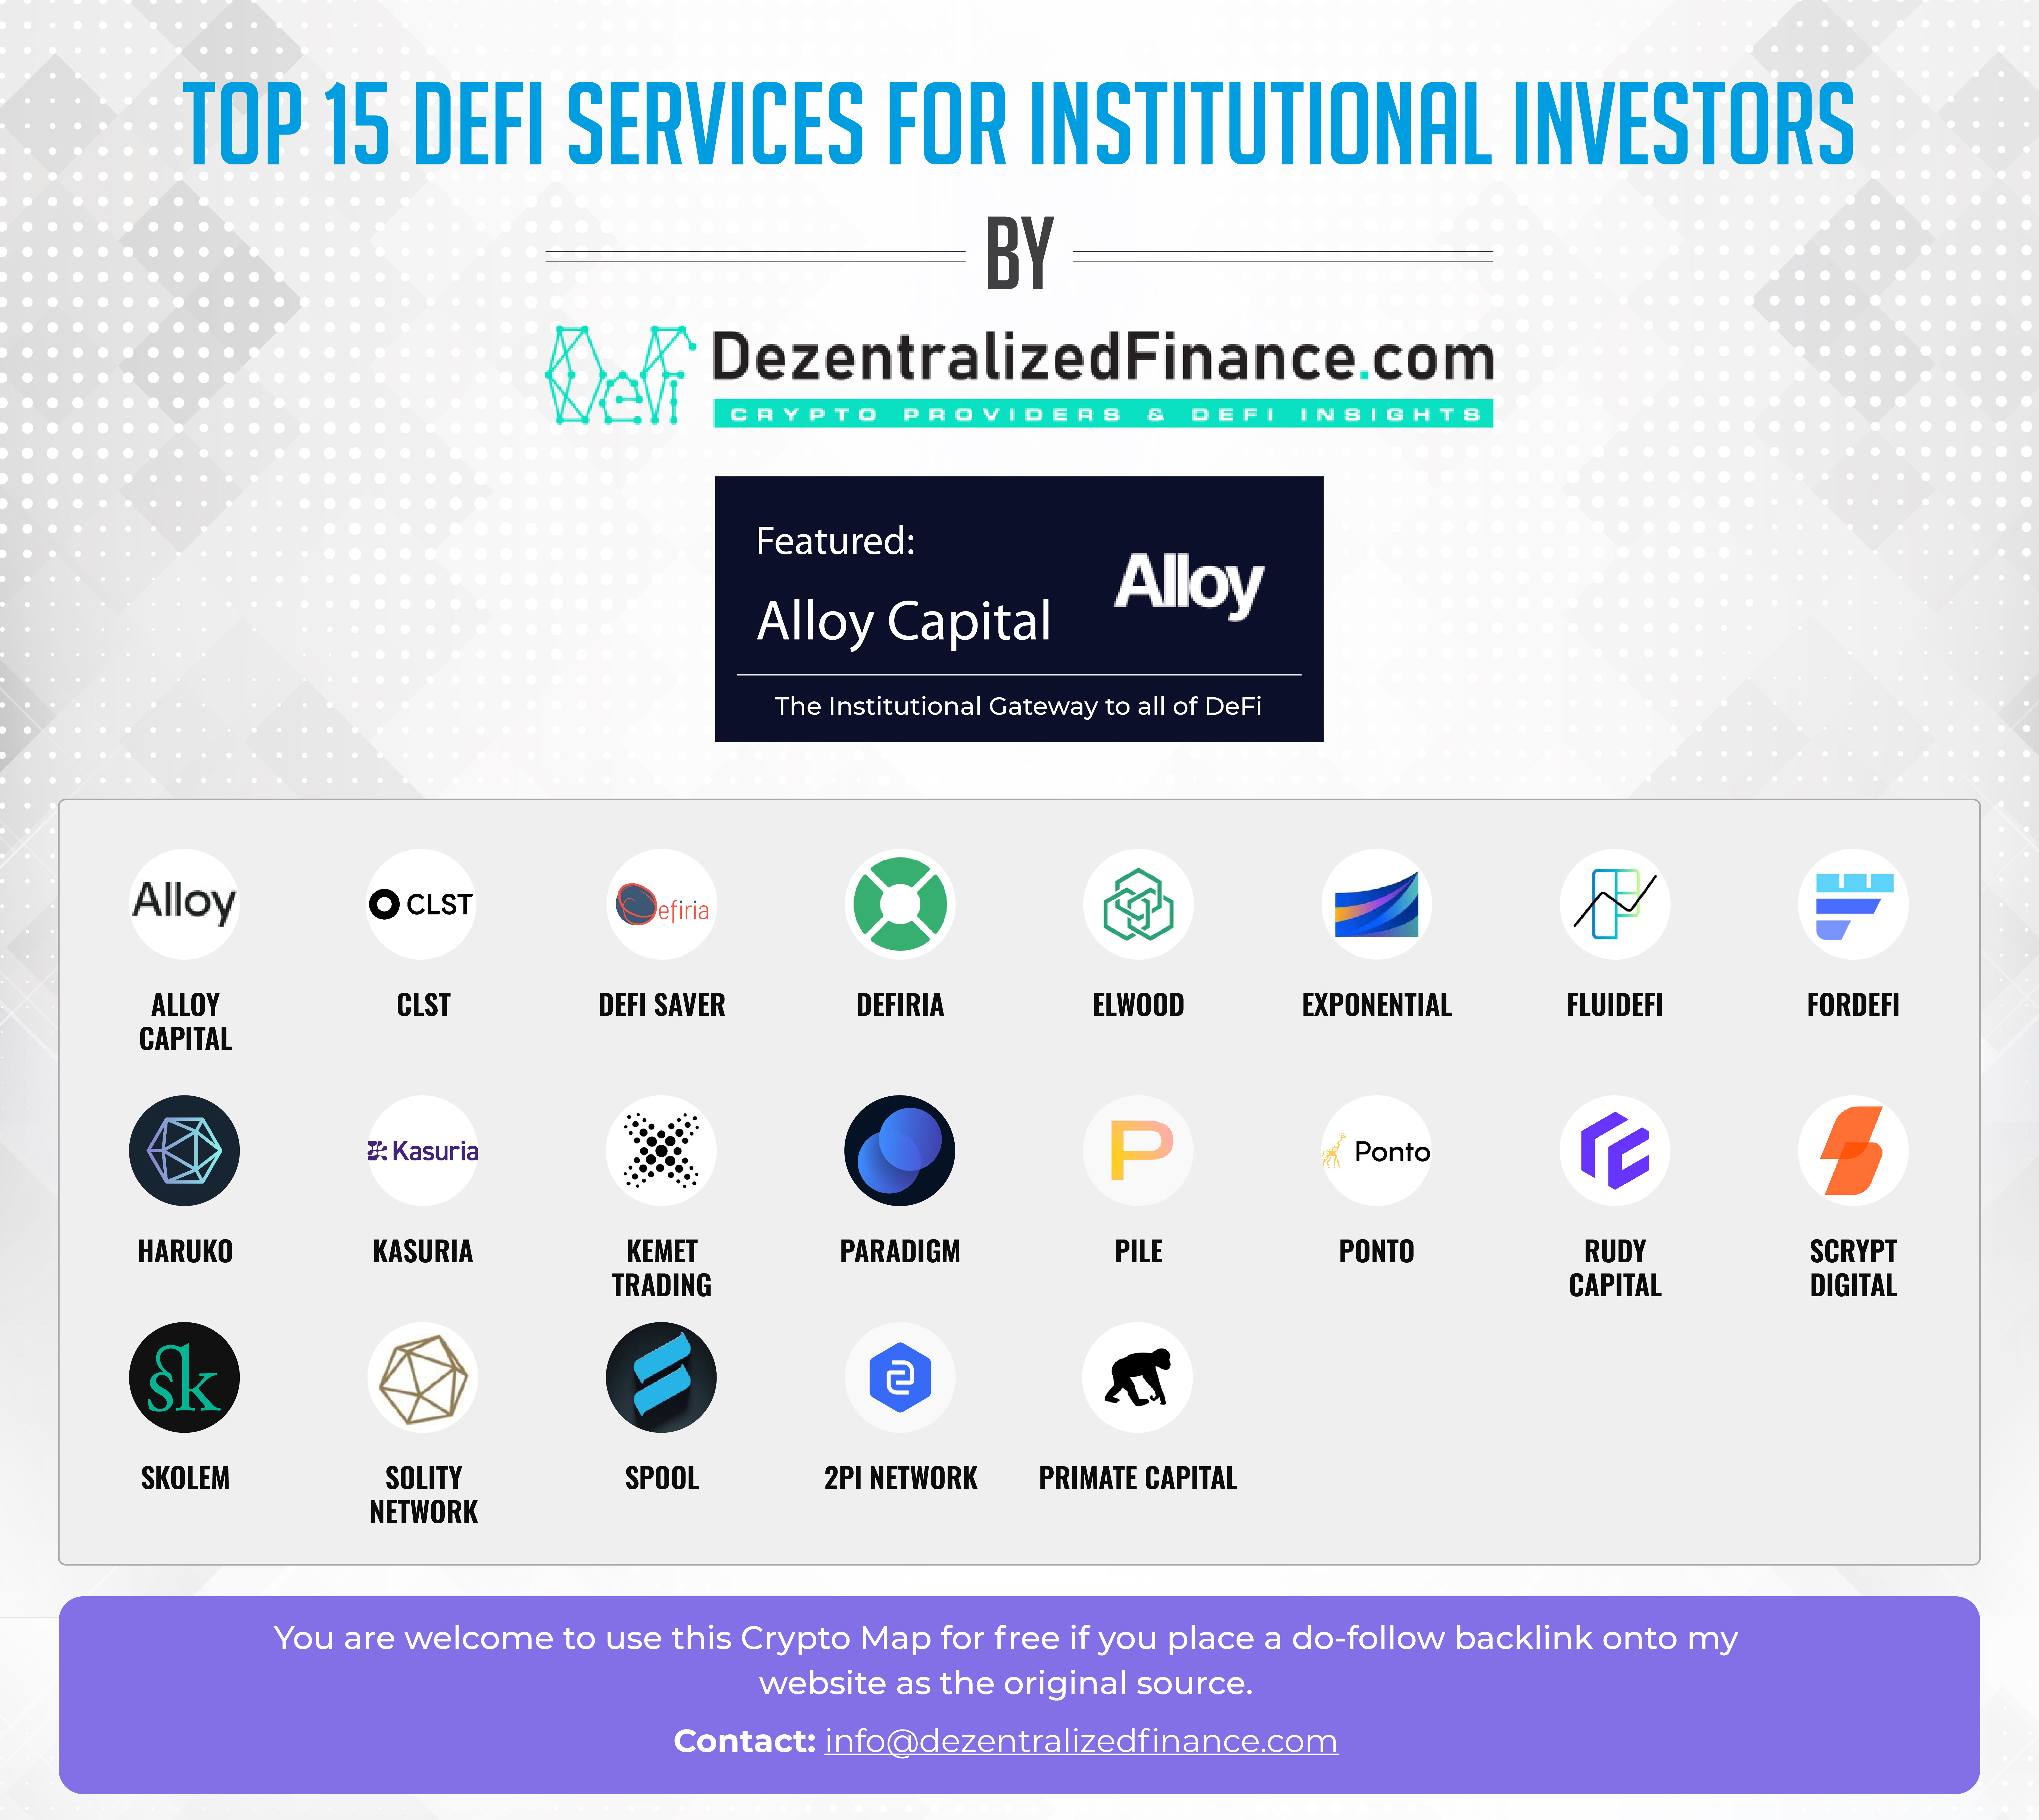 Top 15 DeFi Services for Institutional Investors